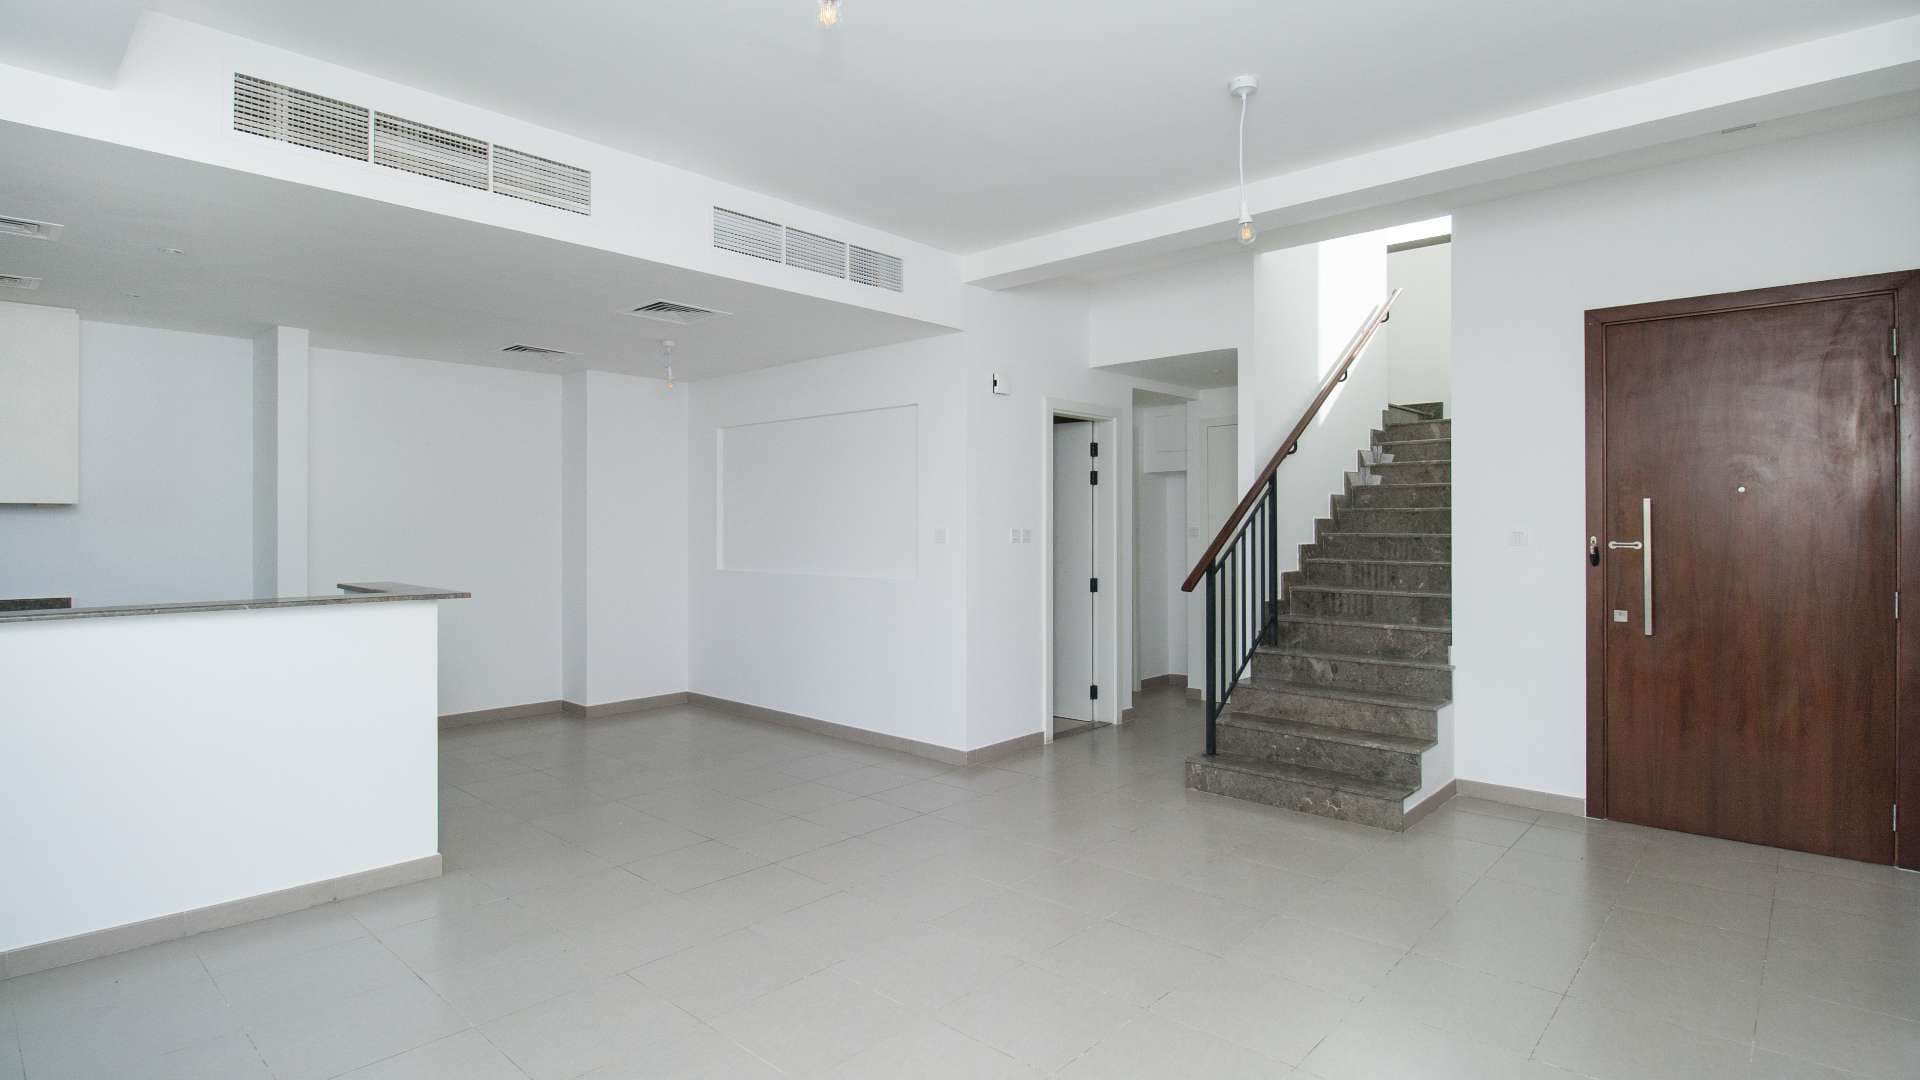 3 Bedroom Townhouse For Sale Safi Townhouses Lp07990 30120326be6fce00.jpg